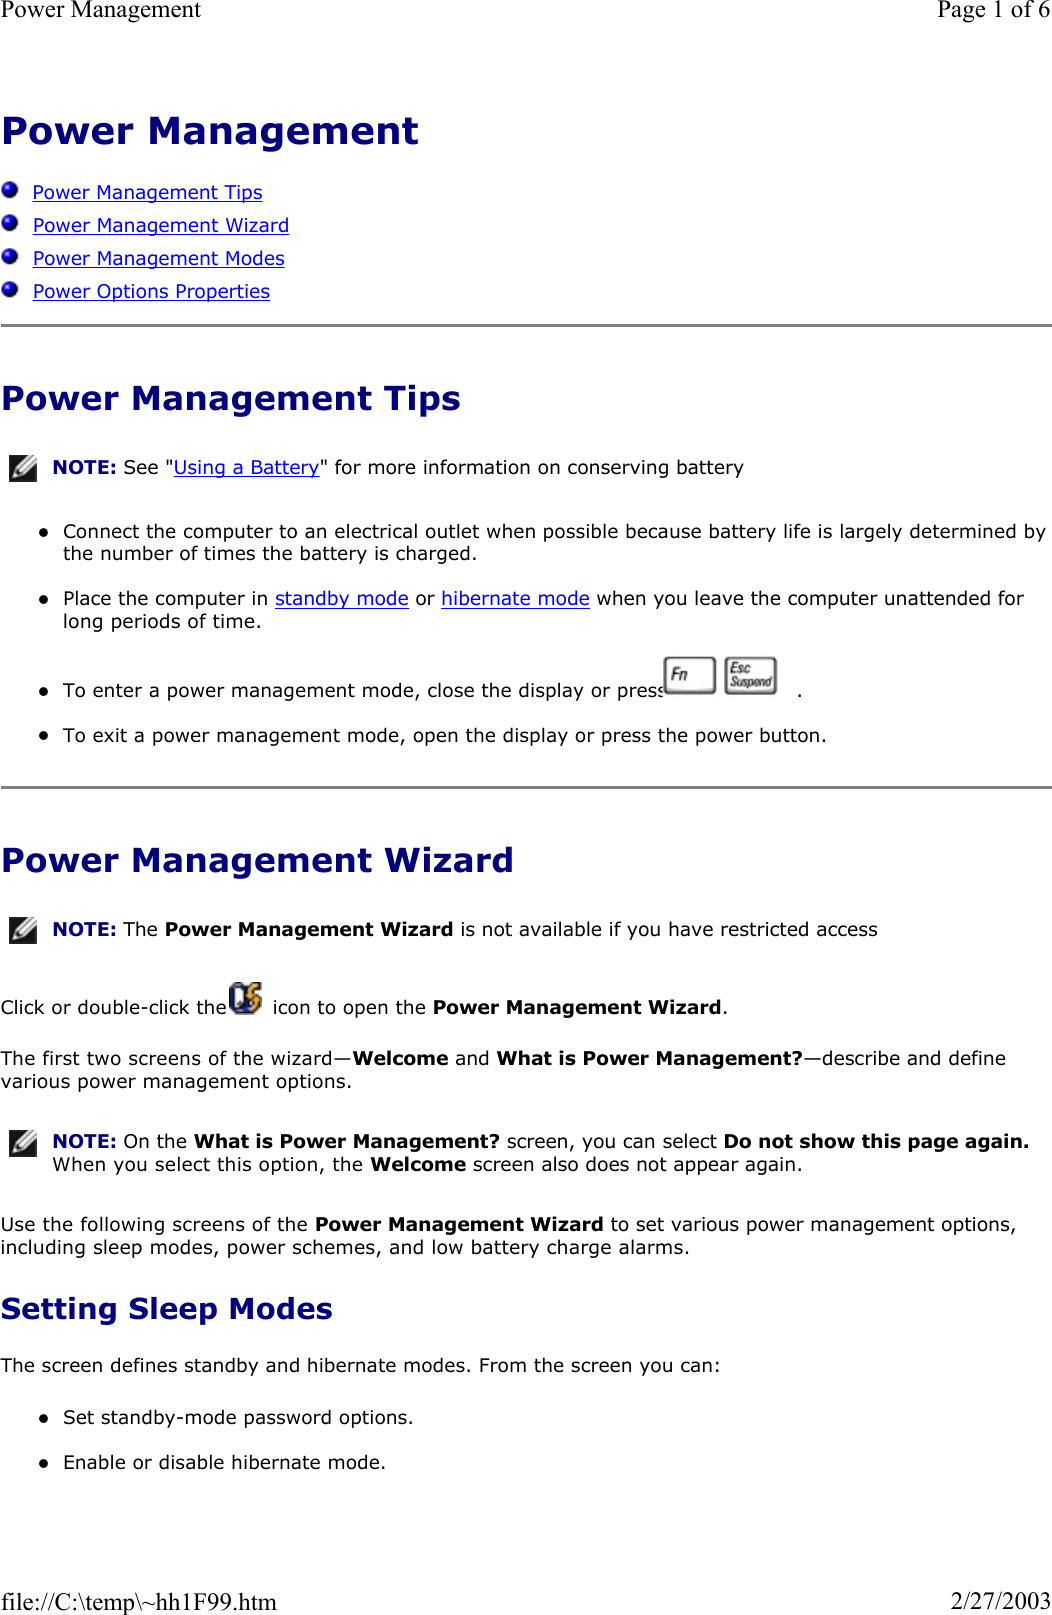 Power Management  Power Management TipsPower Management WizardPower Management ModesPower Options PropertiesPower Management Tips zConnect the computer to an electrical outlet when possible because battery life is largely determined bythe number of times the battery is charged. zPlace the computer in standby mode or hibernate mode when you leave the computer unattended for long periods of time. zTo enter a power management mode, close the display or press     . zTo exit a power management mode, open the display or press the power button. Power Management Wizard Click or double-click the   icon to open the Power Management Wizard.The first two screens of the wizard—Welcome and What is Power Management?—describe and define various power management options. Use the following screens of the Power Management Wizard to set various power management options, including sleep modes, power schemes, and low battery charge alarms. Setting Sleep Modes The screen defines standby and hibernate modes. From the screen you can: zSet standby-mode password options. zEnable or disable hibernate mode. NOTE: See &quot;Using a Battery&quot; for more information on conserving battery NOTE: The Power Management Wizard is not available if you have restricted access NOTE: On the What is Power Management? screen, you can select Do not show this page again.When you select this option, the Welcome screen also does not appear again.Page 1 of 6Power Management2/27/2003file://C:\temp\~hh1F99.htm